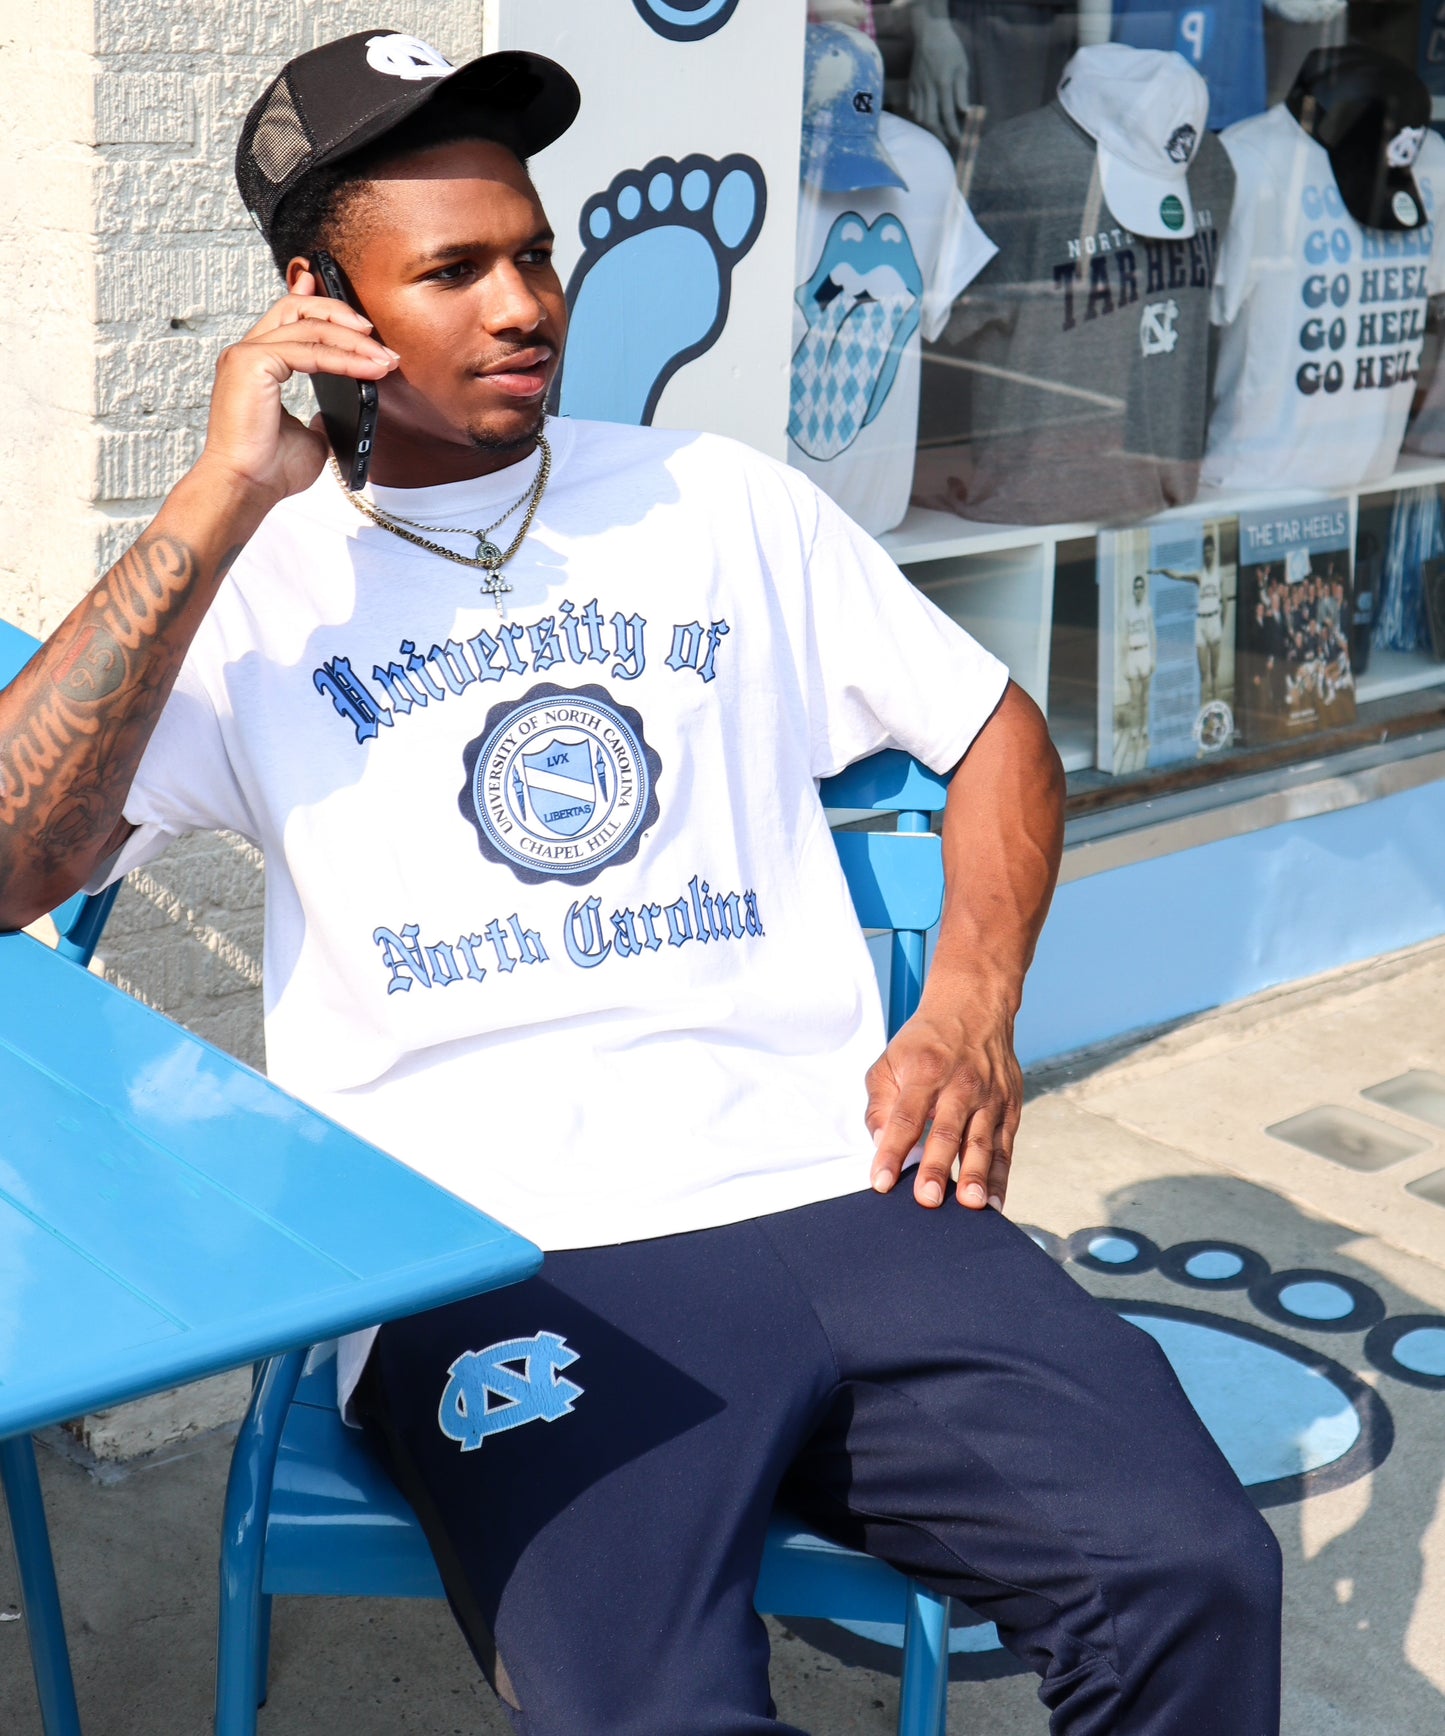 UNC Vintage T-Shirt with Seal